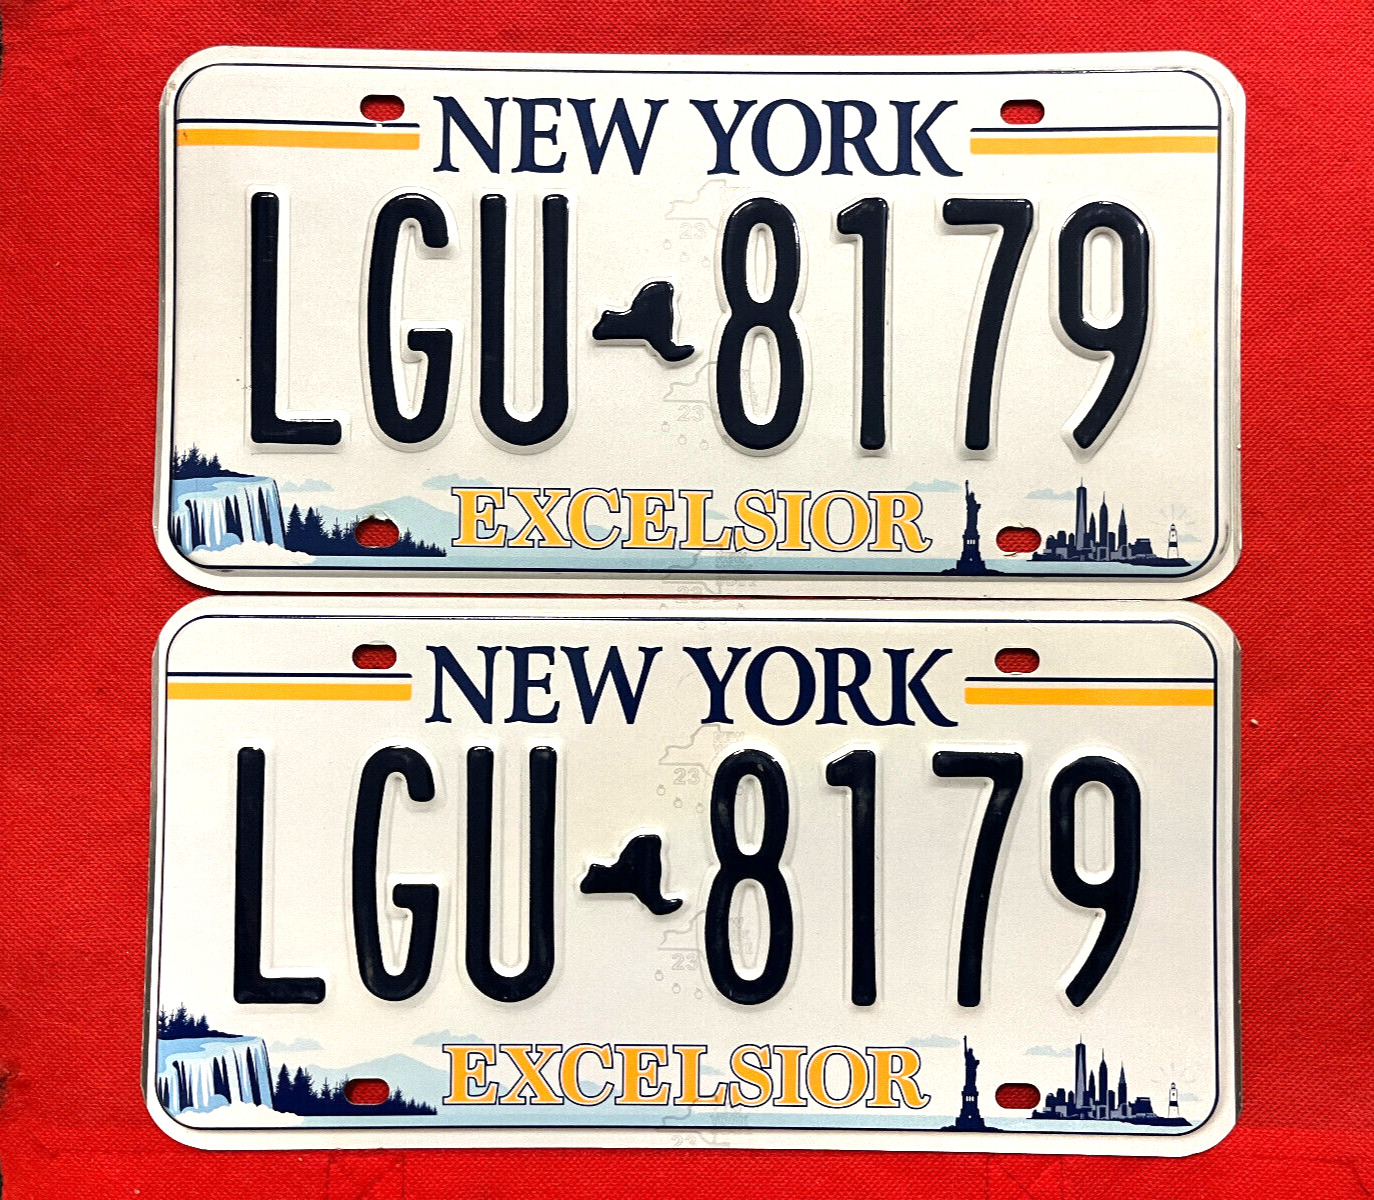 New York License Plate Pair LGU-8179 .... Expired / Crafts / Collect / Specialty